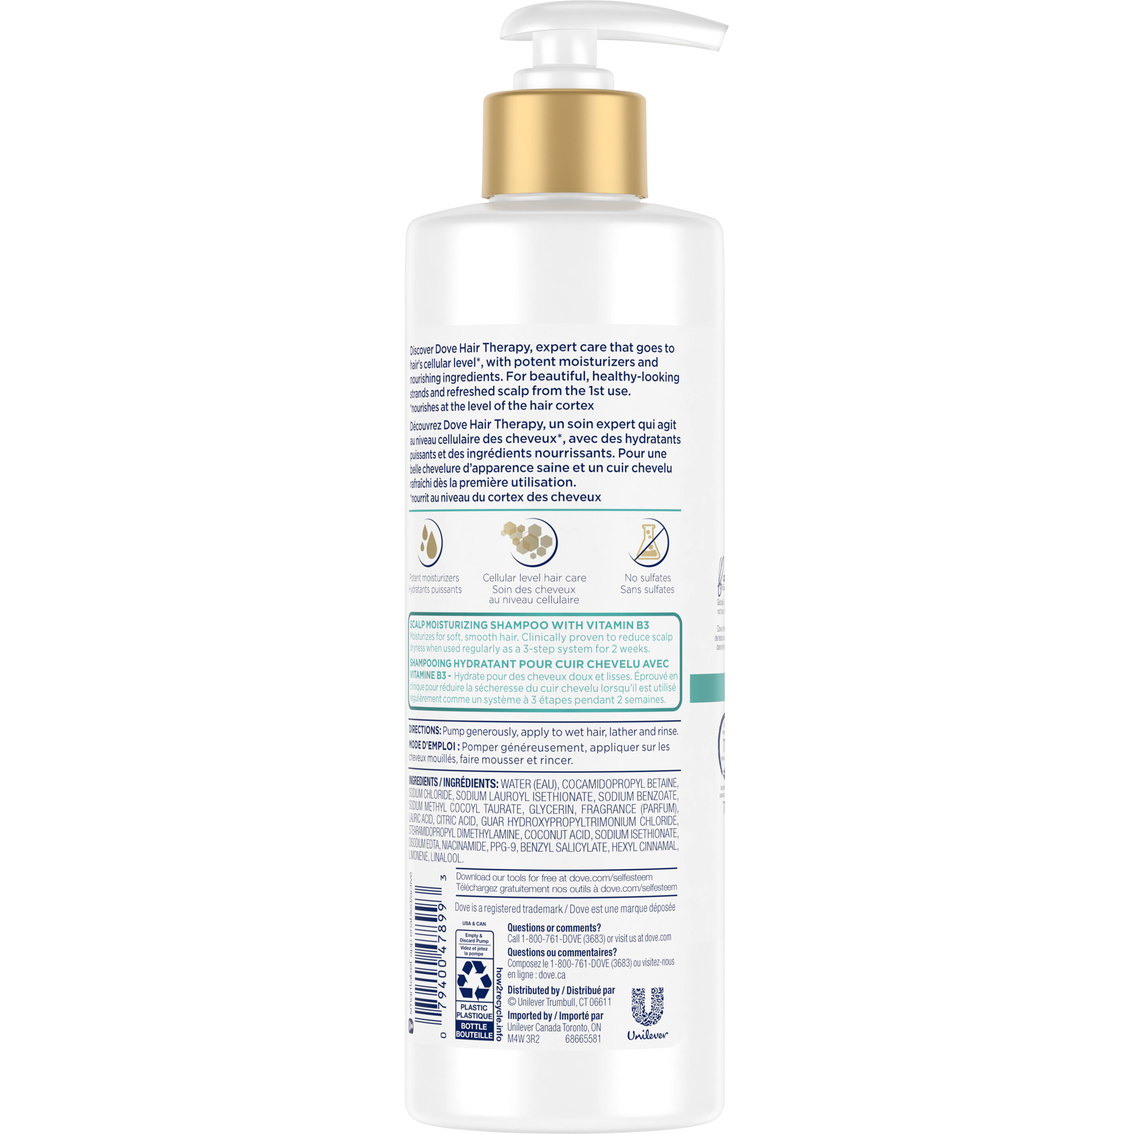 Dove Hair Therapy Shampoo Dry Scalp Therapy, 13.5 oz. - Image 2 of 3